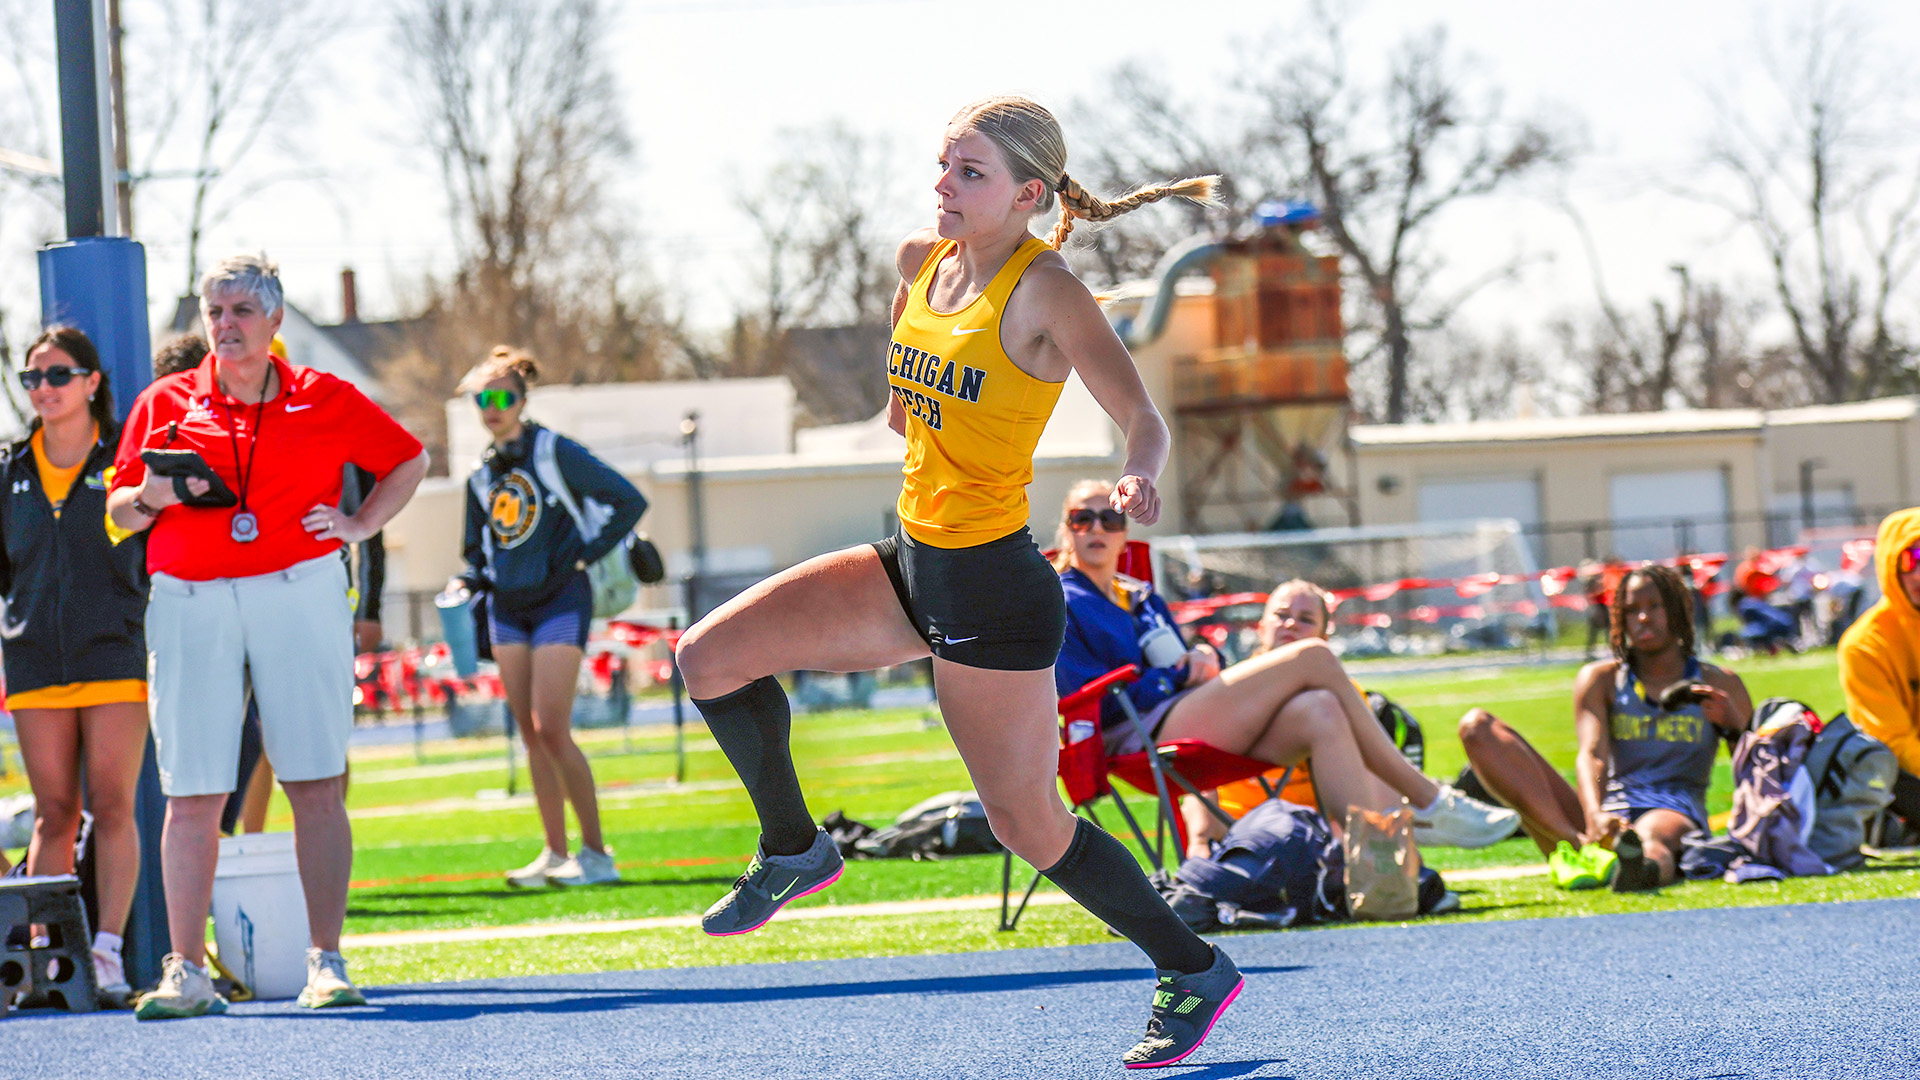 Tech T&amp;F to Compete at Phil Esten Challenge this Weekend